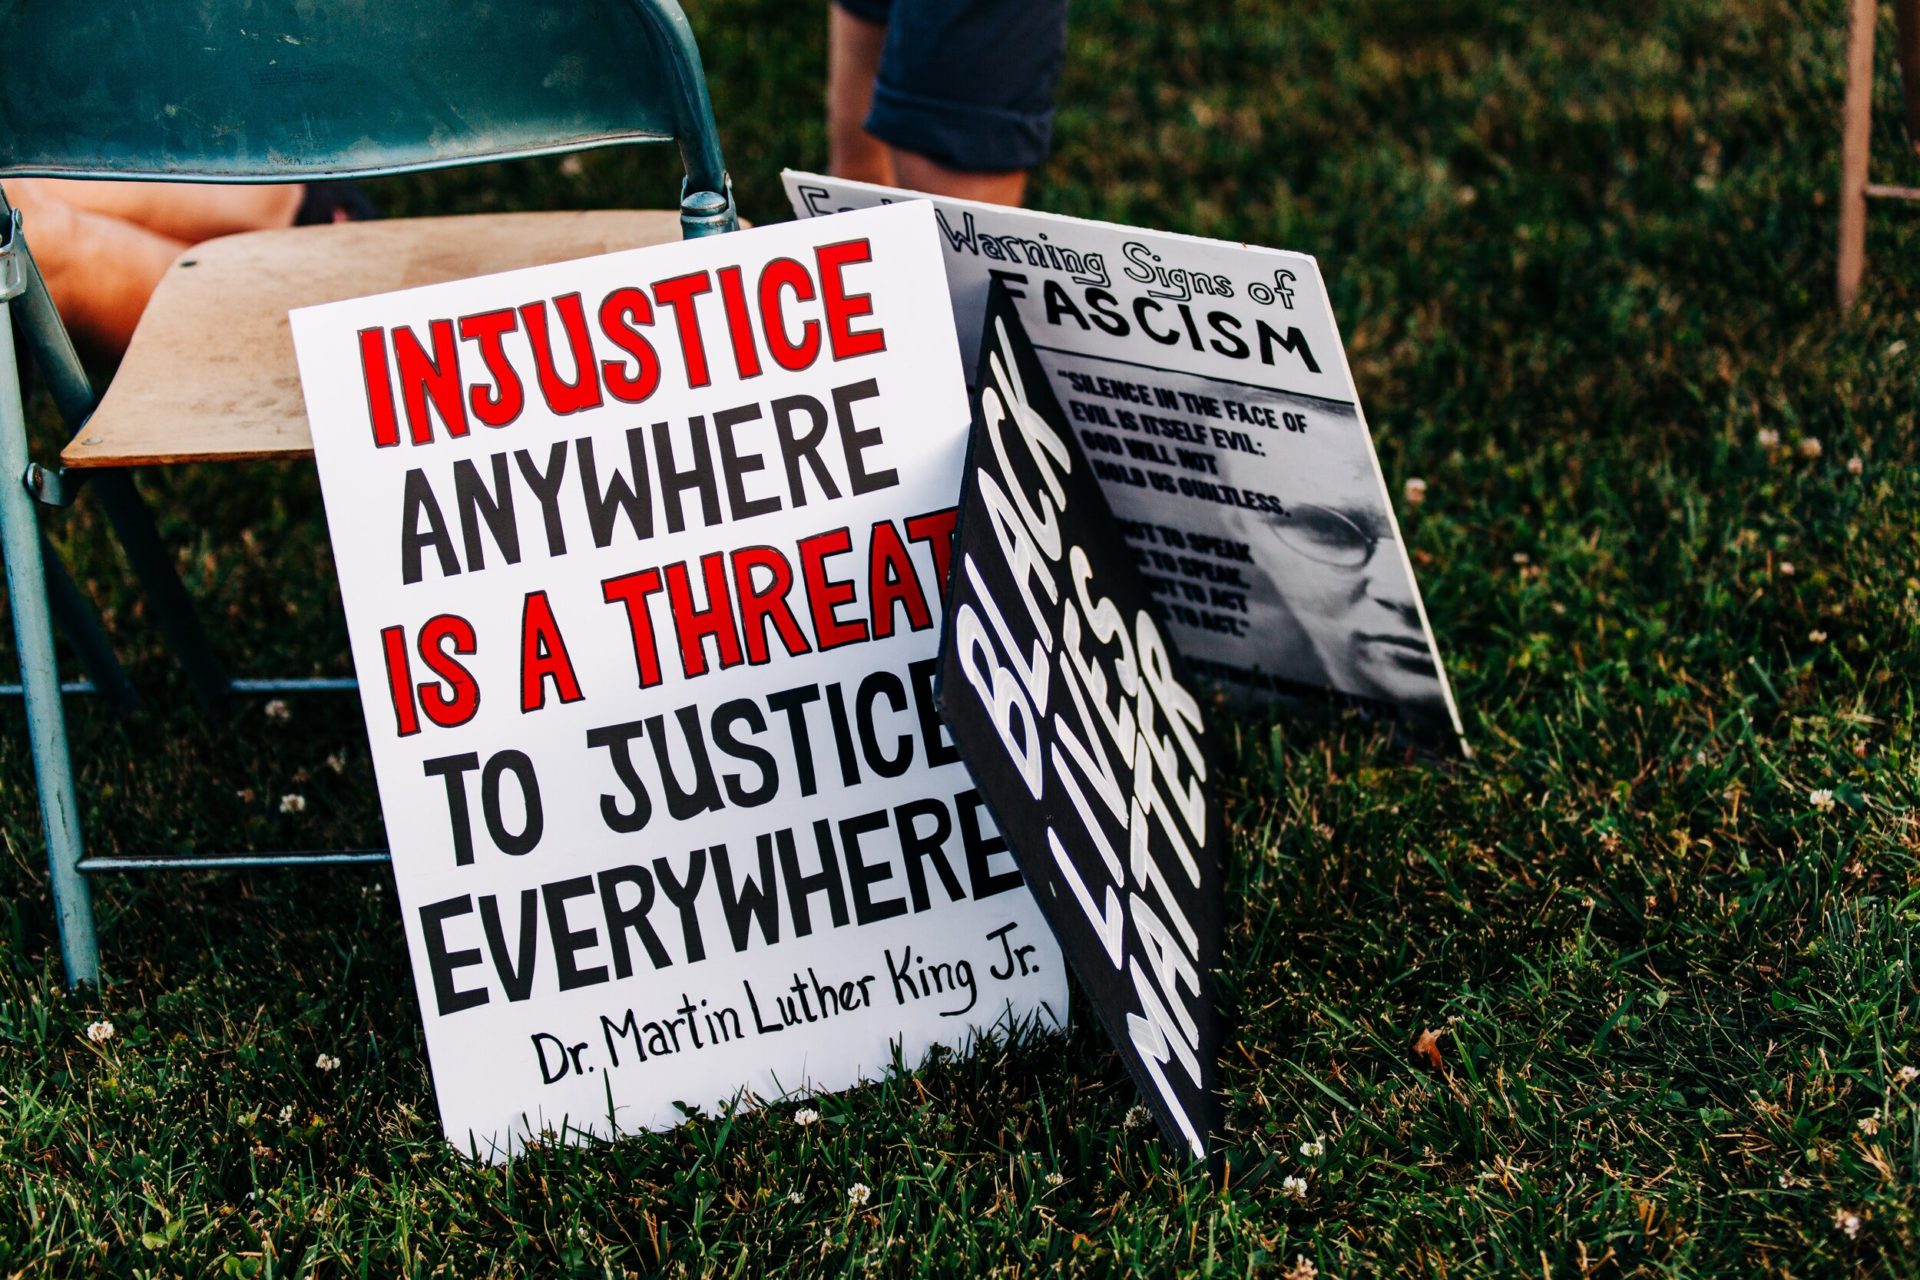 June 19th, 2020 – Protest signs at Black Lives Matter Knoxville’s Juneteenth Rally and March (Photo by Heather Mount | Unsplash)